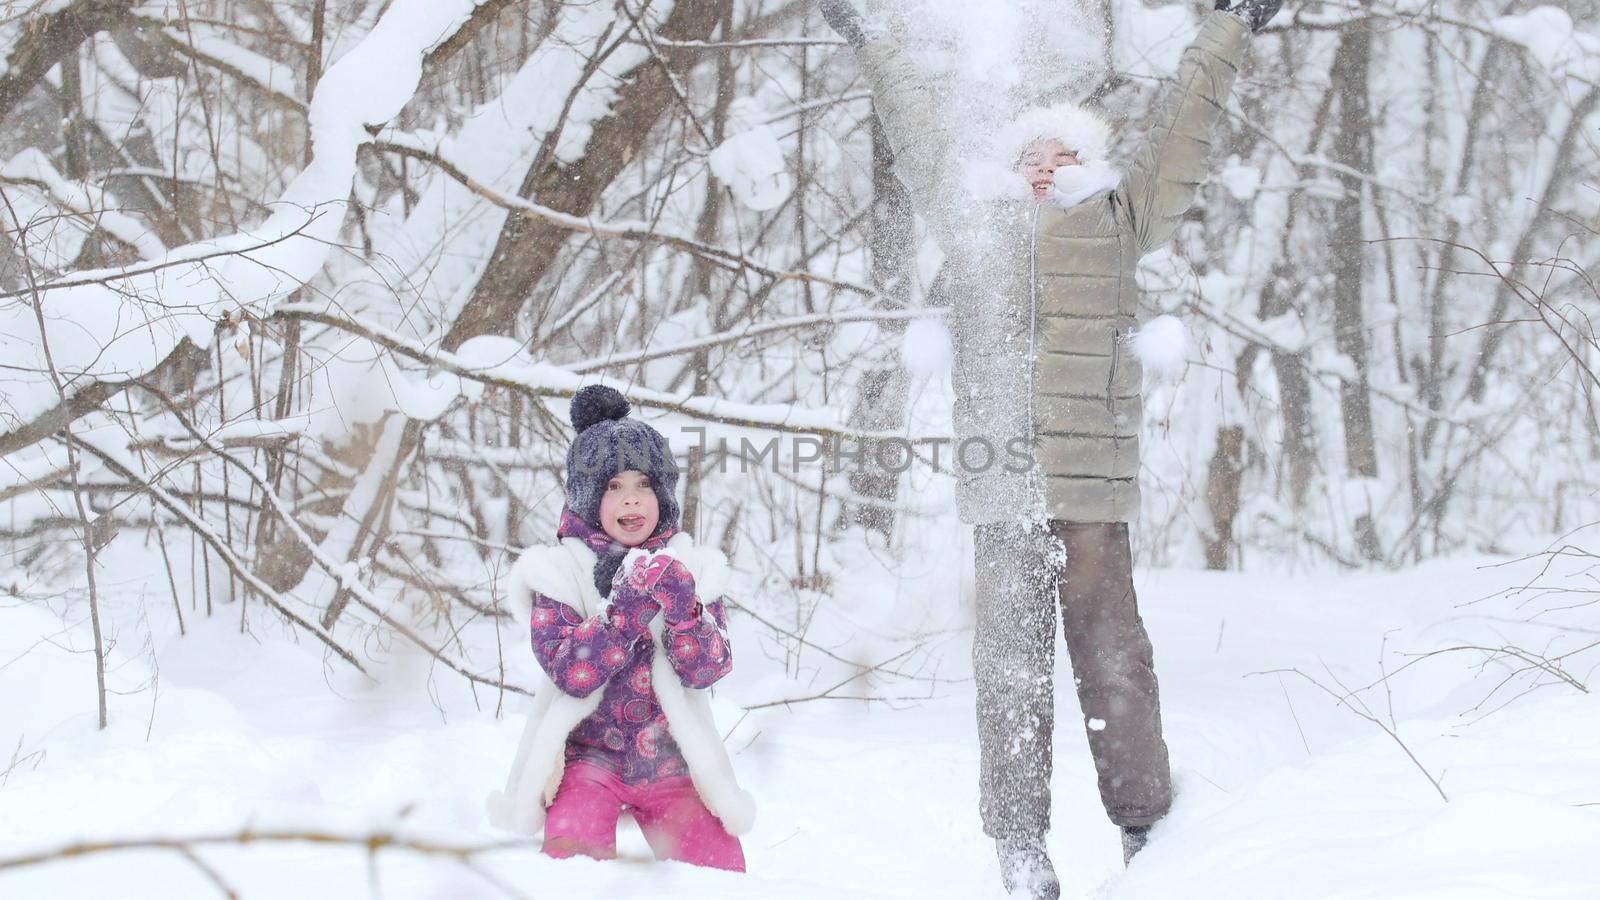 Two little girls playing with snow in winter forest. Mid shot